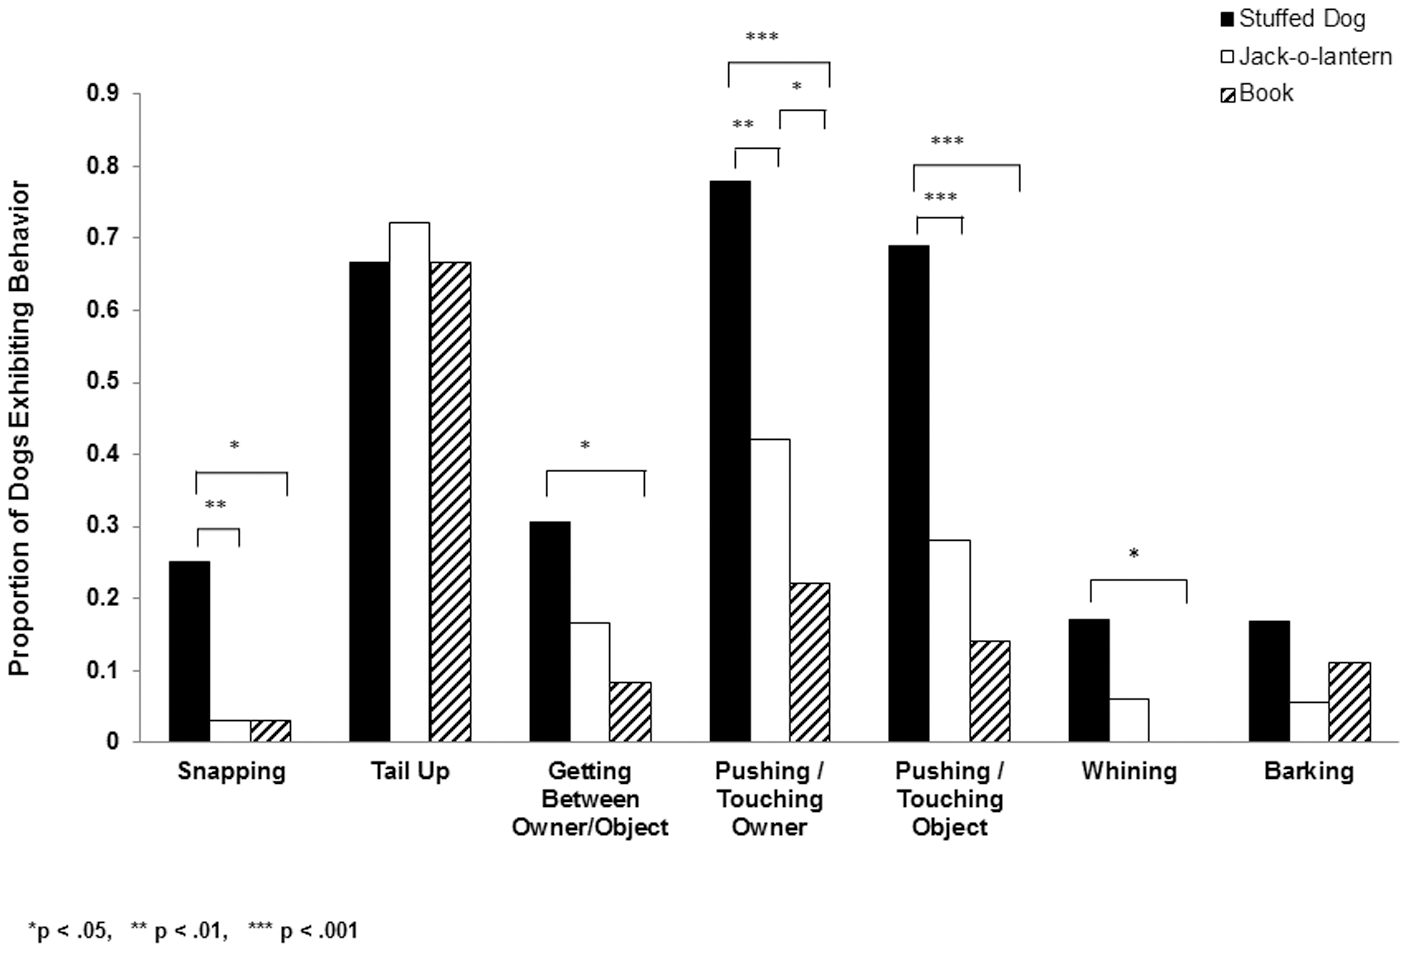 A grouped bar chart in black and white showing the proportion of dogs exhibiting certain behaviour